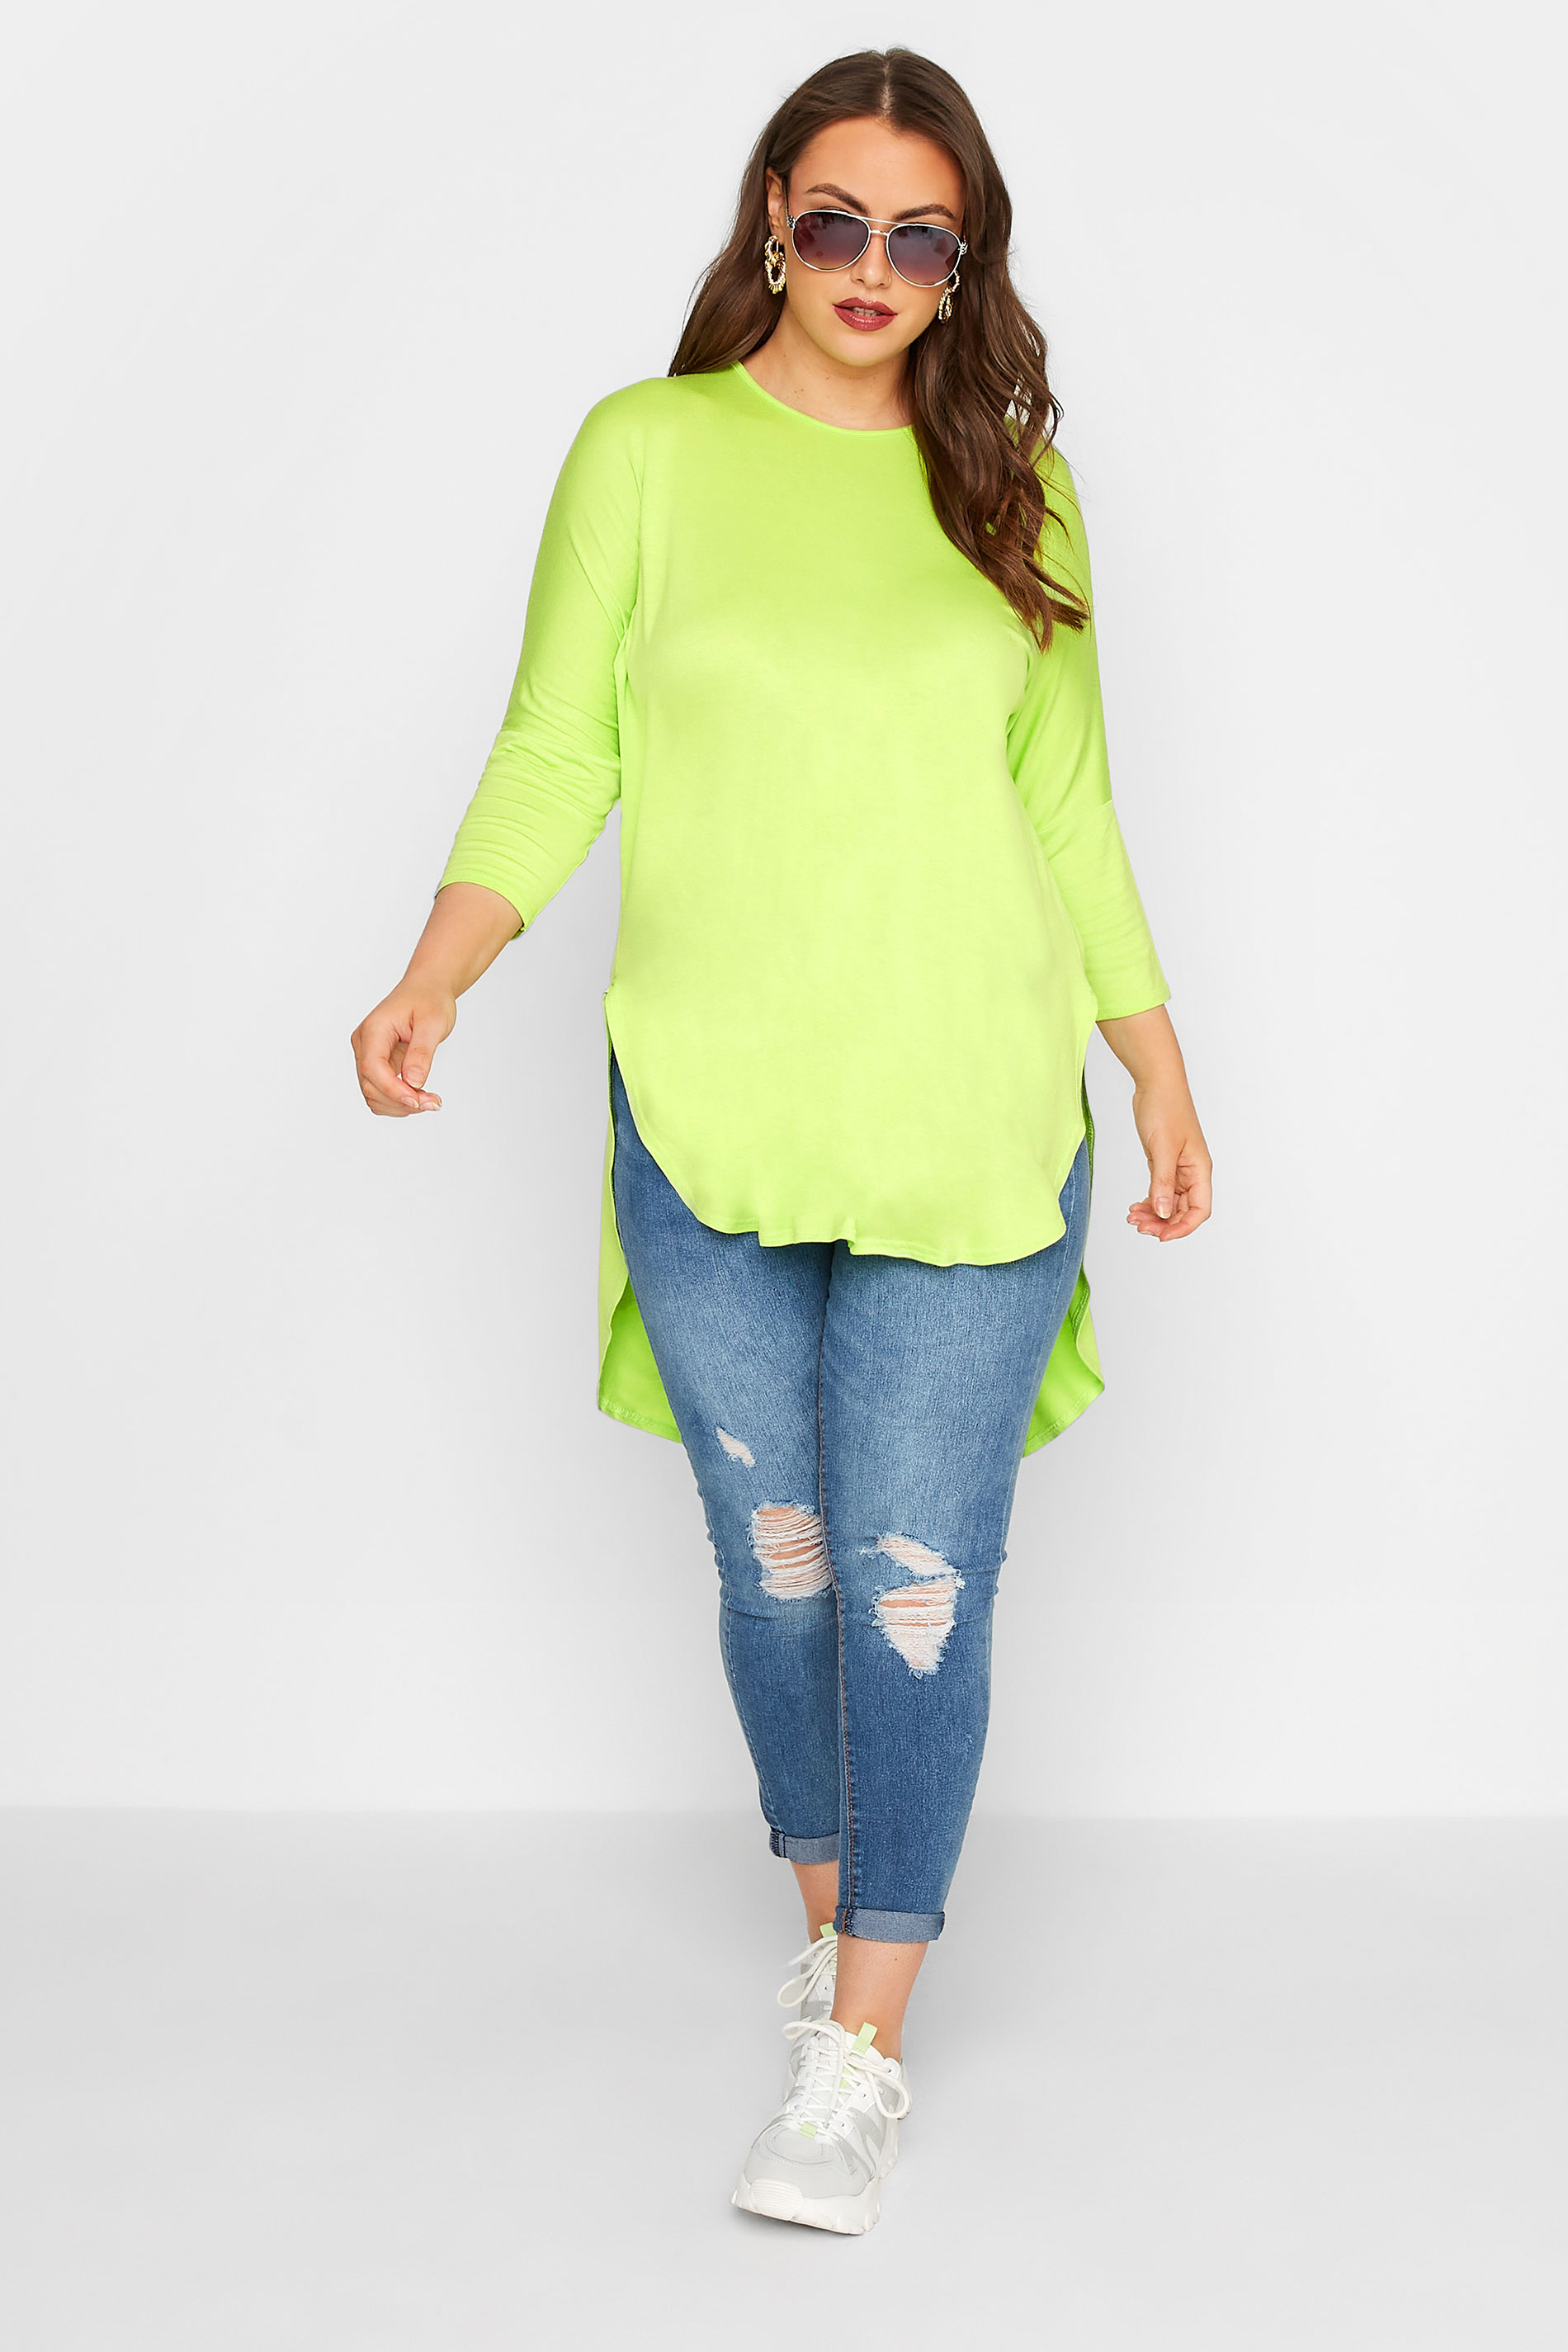 Grande taille  Tops Grande taille  Tops Ourlet Plongeant | LIMITED COLLECTION - T-Shirt Vert Citron Manches Longues Ourlet Plongeant - AE14382